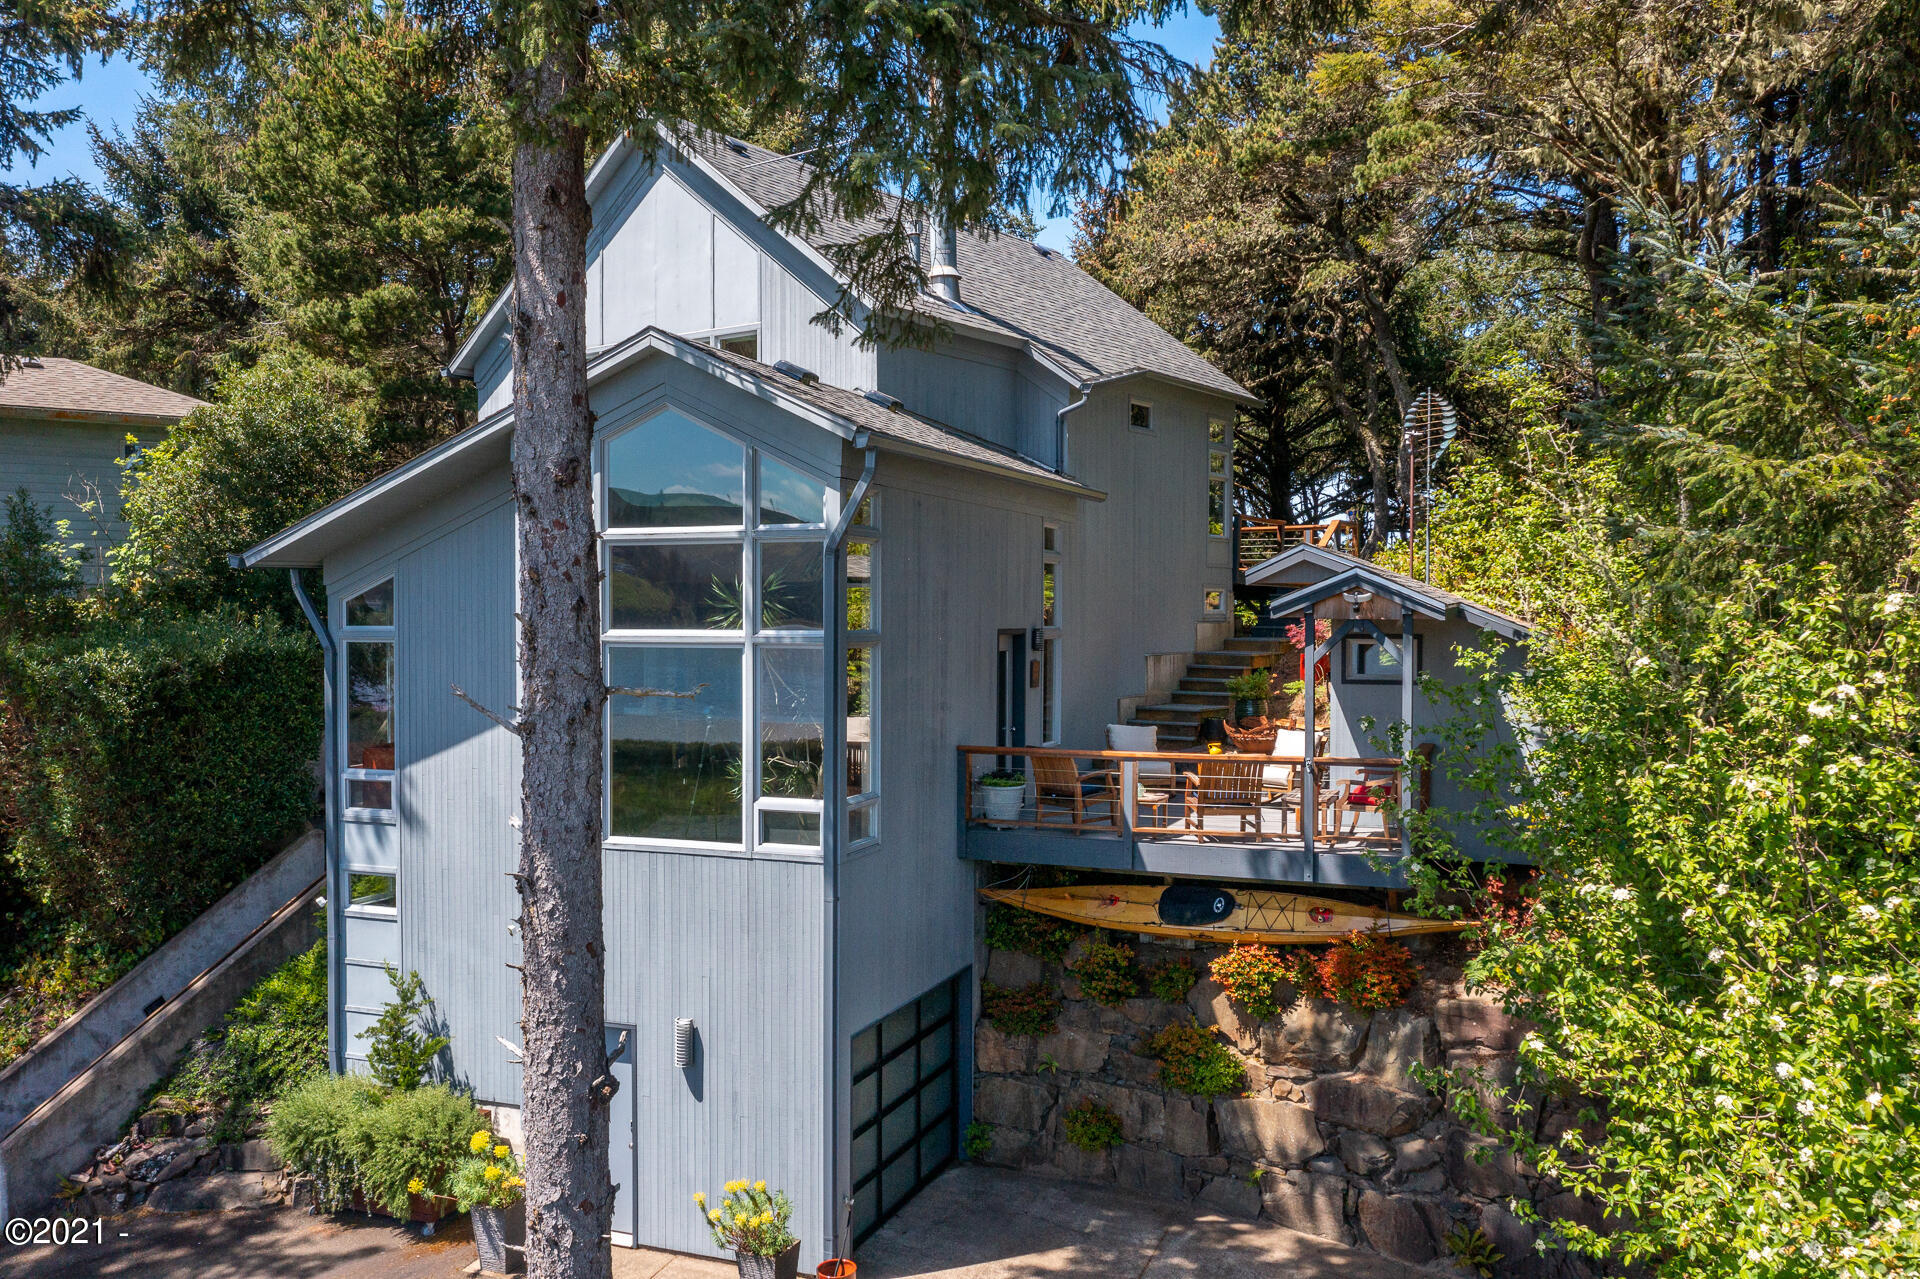 25 South Bay Ridge Depoe Bay, Gleneden Beach, Lincoln City, Newport, Otis, Rose Lodge, Seal Rock, Waldport, Yachats, To Home Listings - Amy Plechaty, Emerald Coast Realty Real Estate, homes for sale, property for sale